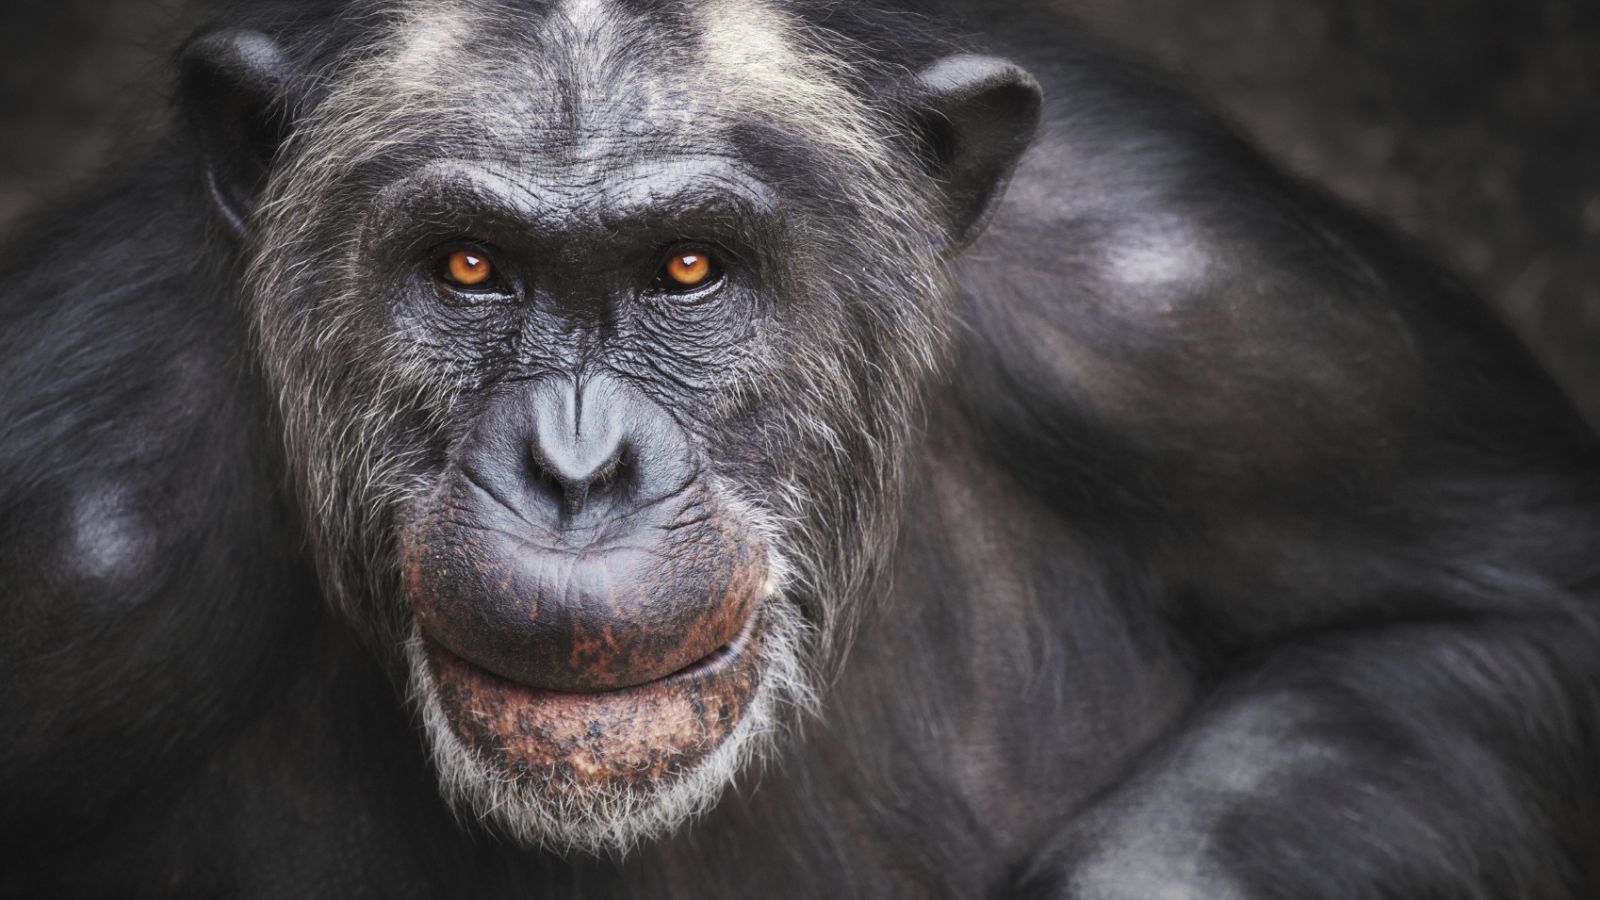 Human diseases are threatening chimpanzees :: Understanding Animal Research